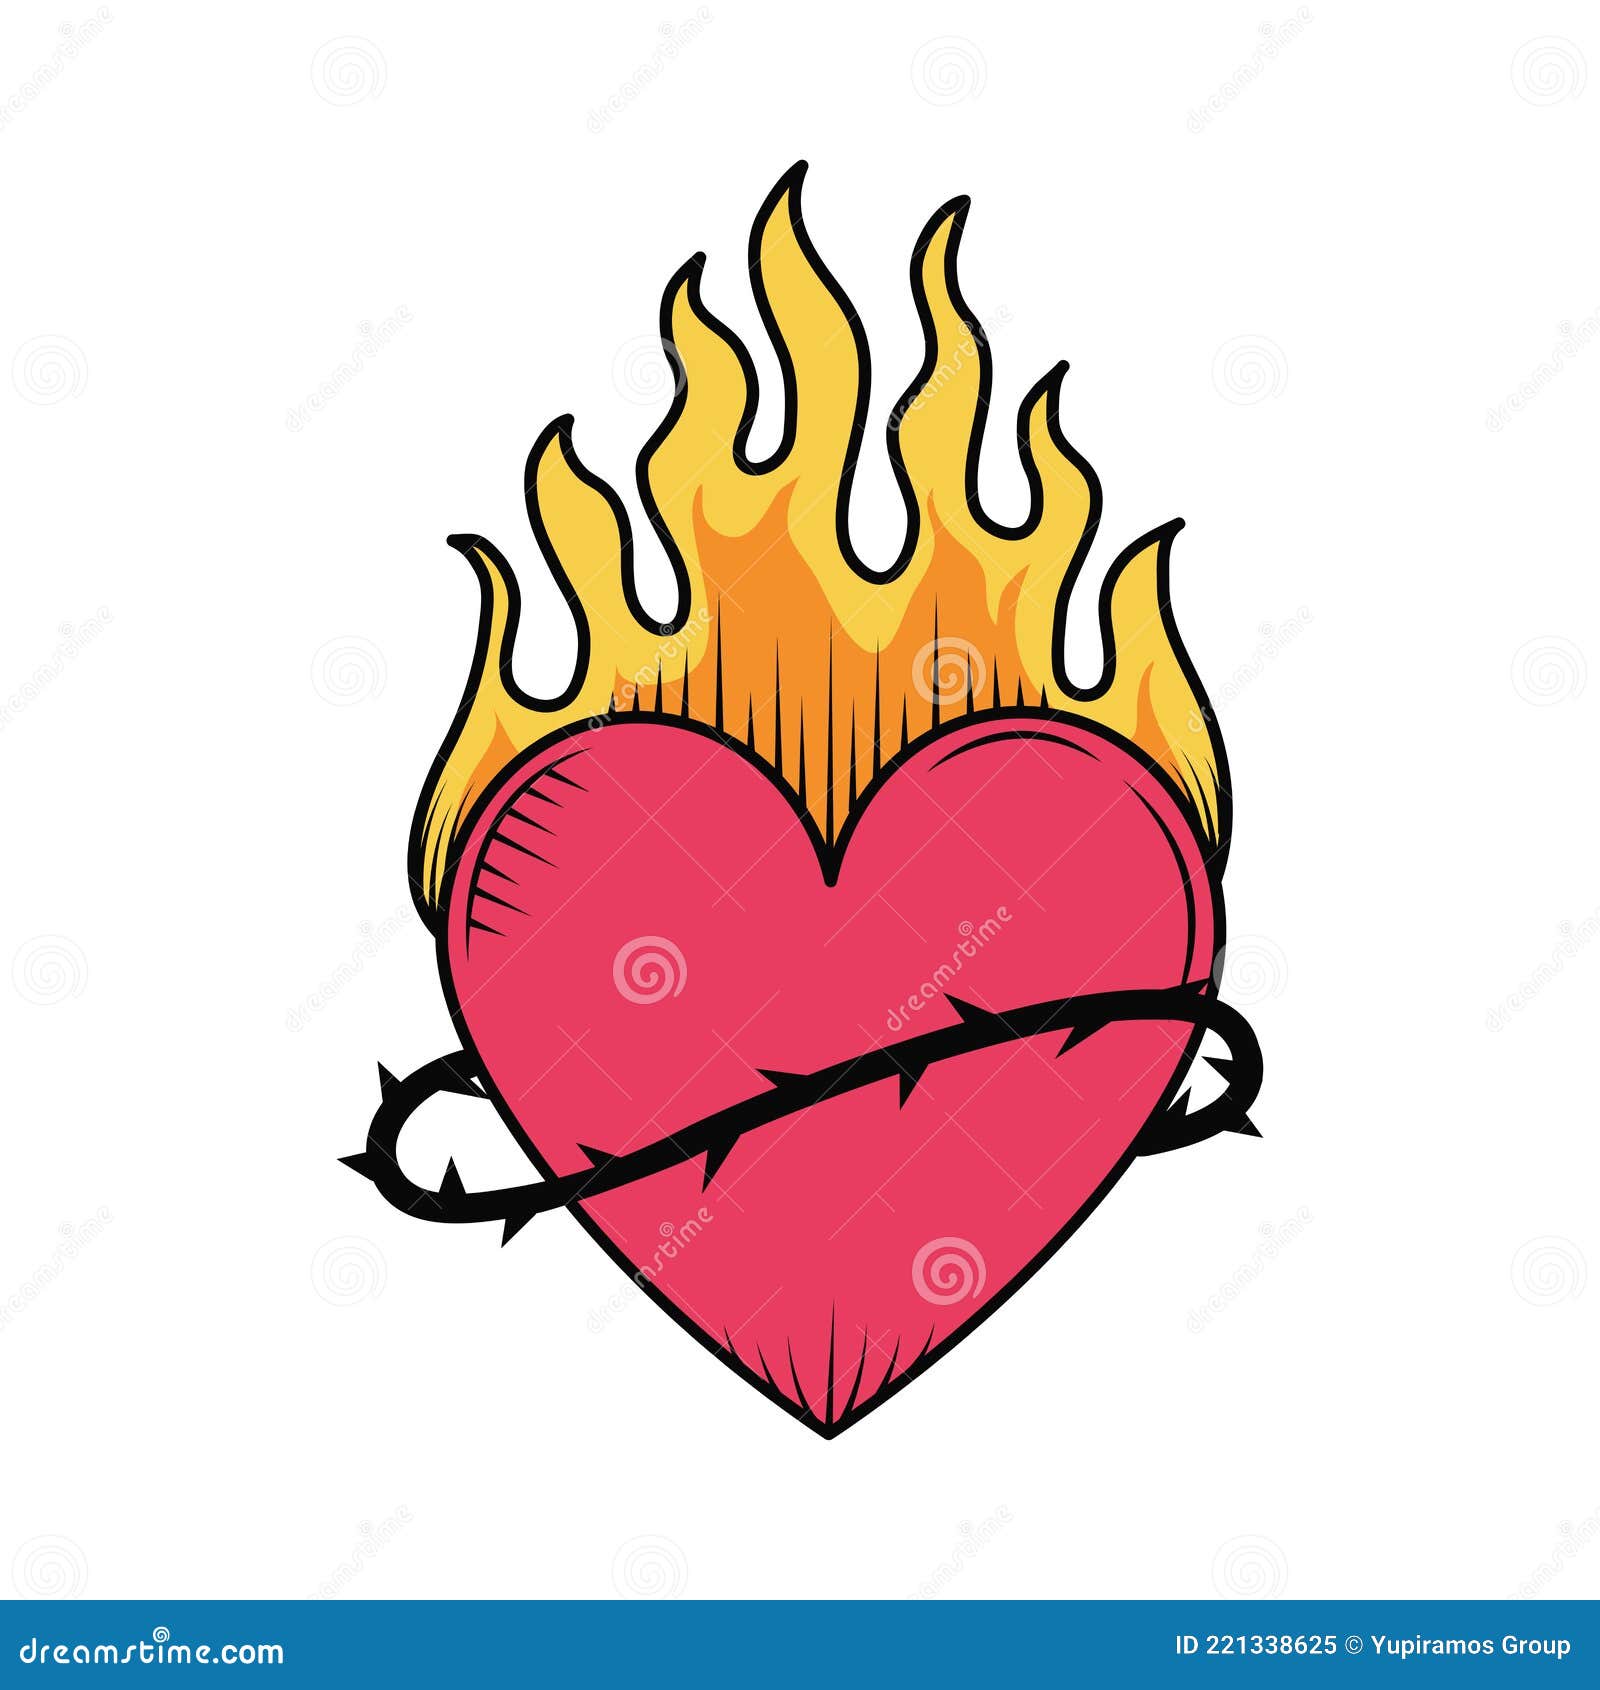 Flames Heart Tattoo Stock Illustrations – 92 Flames Heart Tattoo Stock  Illustrations, Vectors & Clipart - Dreamstime